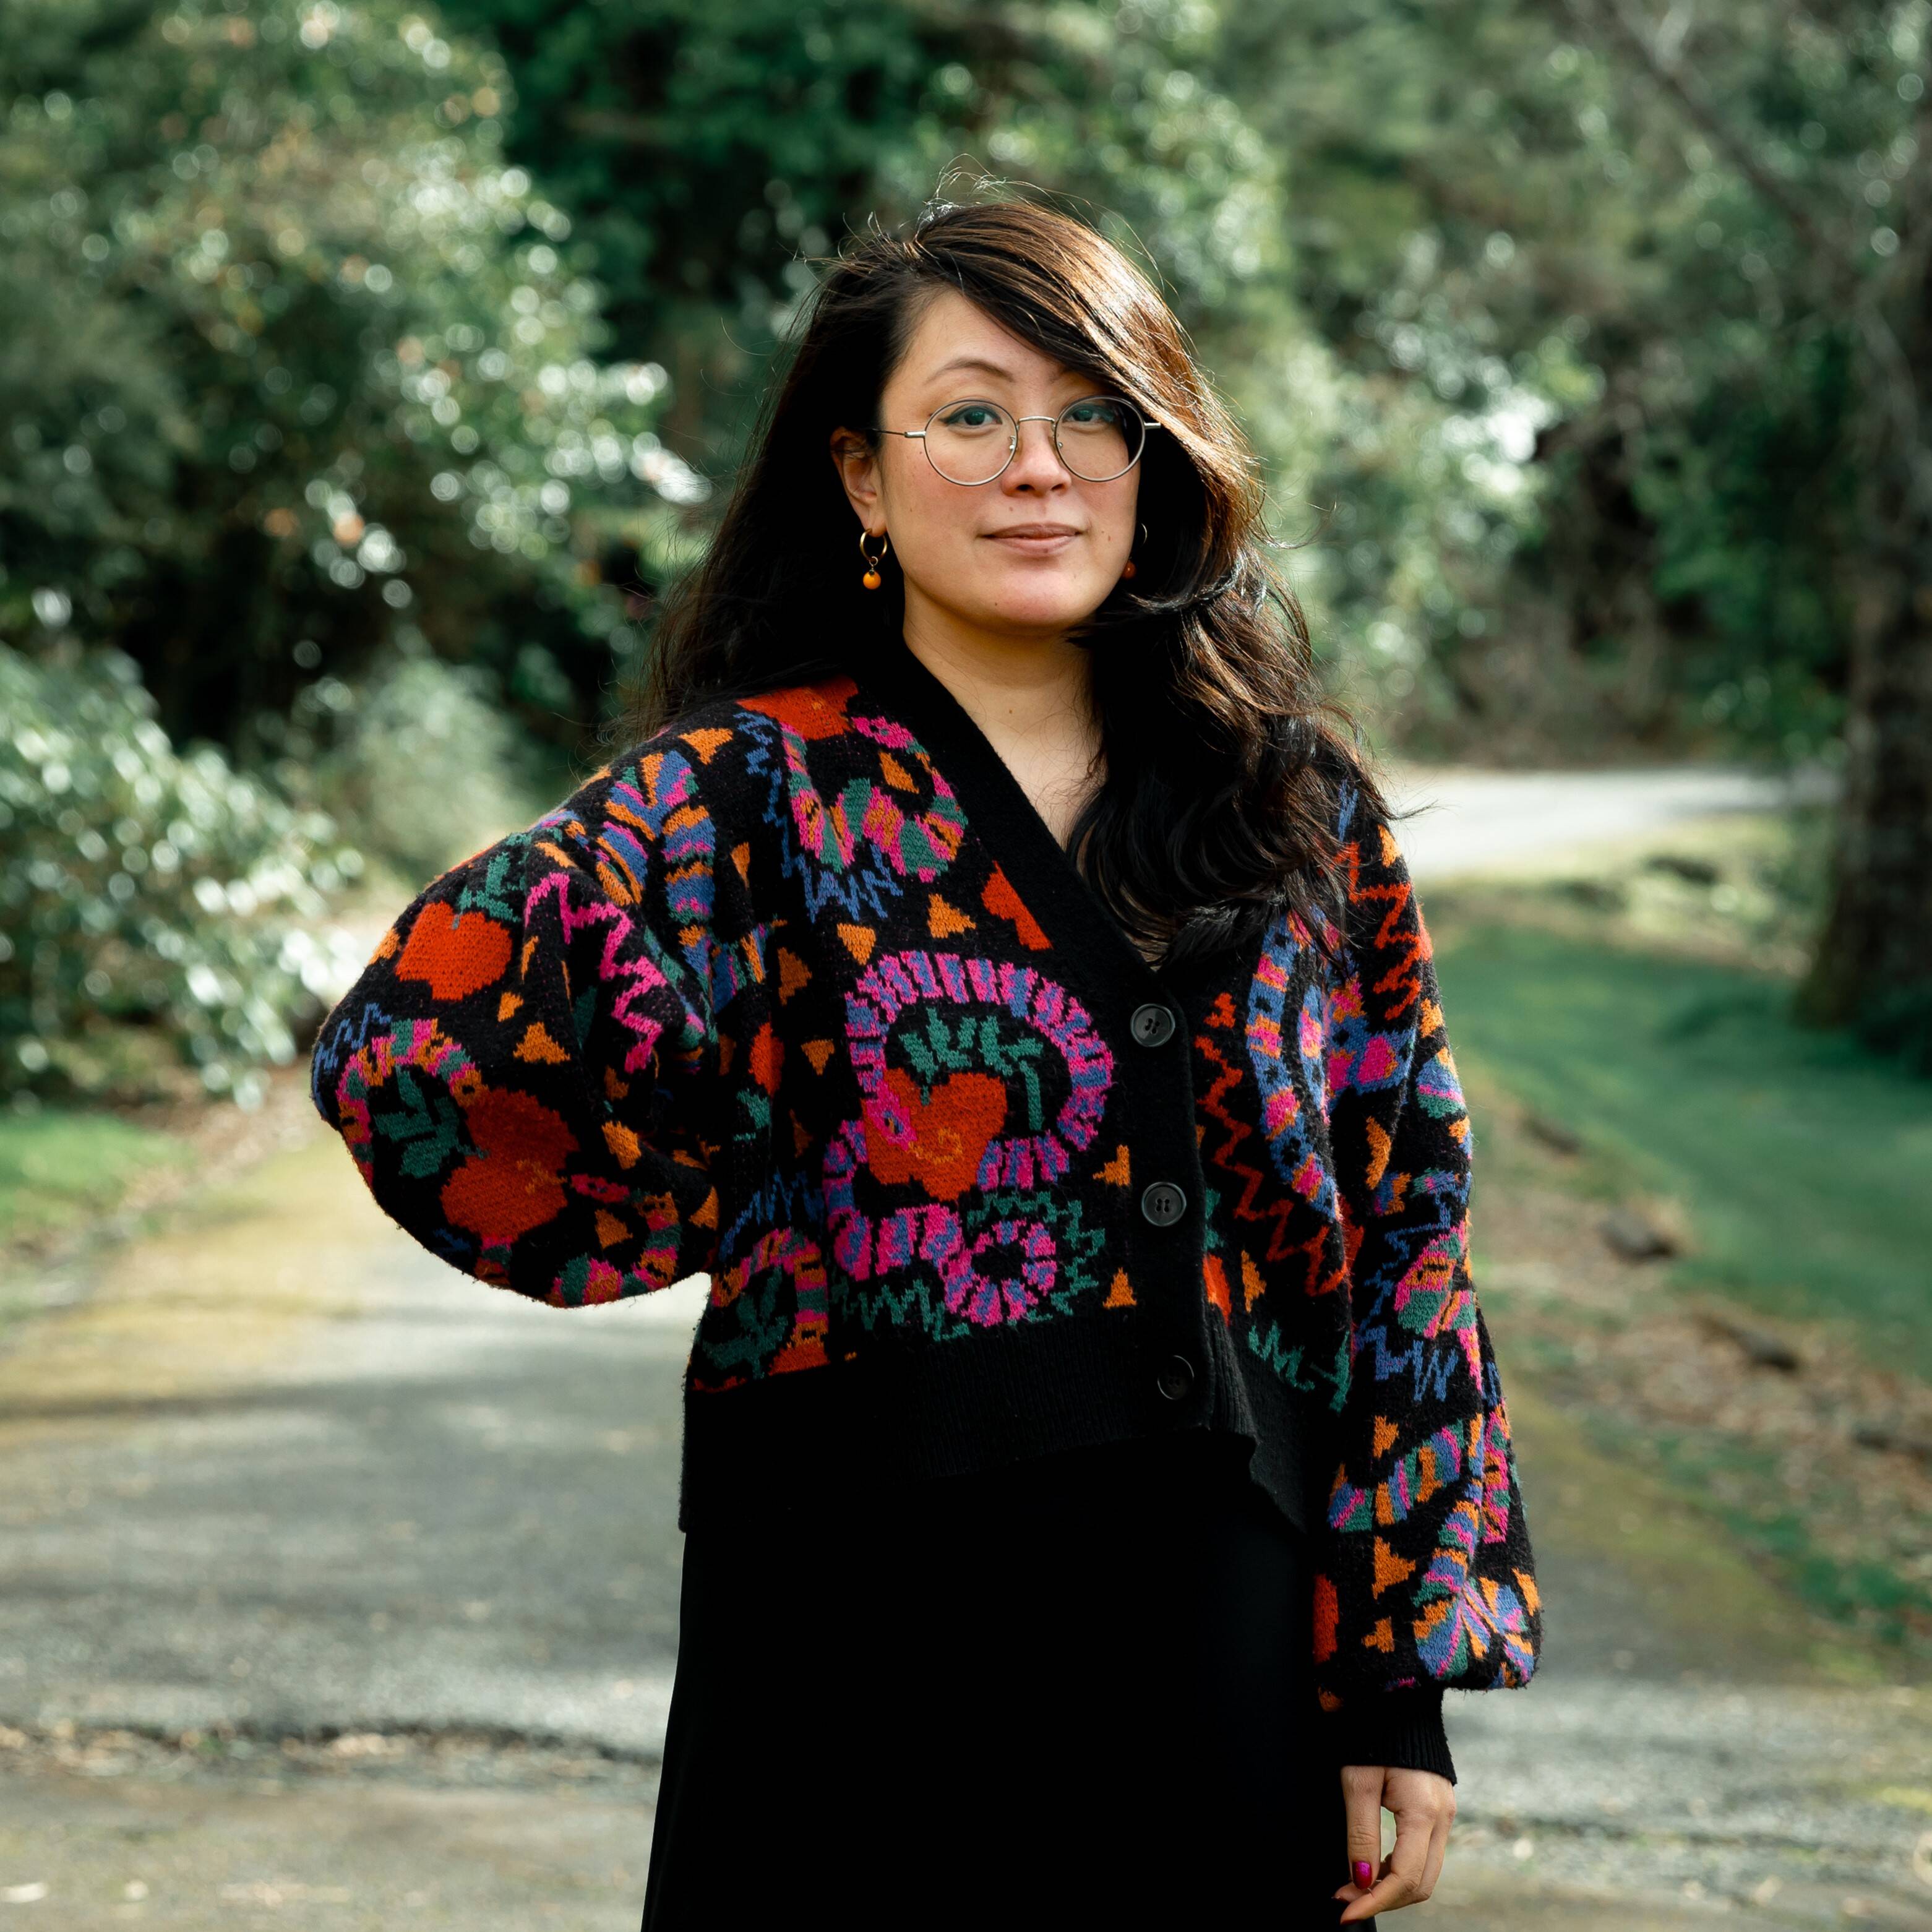 <p><strong>Rosabel Tan</strong>&nbsp;</p>

<p><a href="http://www.instagram.com/incorrect_pin/">Rosabel Tan</a> is a writer, researcher and producer of Peranakan Chinese descent. She is the director of Satellites &ndash; currently working on an archive of Asian diaspora artists and art making in Aotearoa New Zealand &mdash; and programme manager for The Next Page, a national training programme for early-career magazine editors. She is a founding editor of arts and culture journal The Pantograph Punch and was the inaugural curator: Asia for the 2022 Auckland Writers Festival and co-programmer for Verb Festival 2023.</p>

<p>Rosabel Tan 是一位峇峇娘惹 (Peranakan) 华裔作家、研究者和制片人。她是Satellites项目的主席，负责对于新西兰亚裔侨民艺术家及其创作的档案整理。她也是专为杂志初级编辑所设计的国家培训课程The Next Page的项目经理。 同时，她是艺术与文化期刊《The Pantograph Punch》的创始编辑之一， 2022 年Auckland Writers Festival的首任亚洲部策划人，更是2023年Verb Festival 的项目设计师之一。</p>

<p>Photo credit: Julie Zhu&nbsp;</p>

<p>&nbsp;</p>
